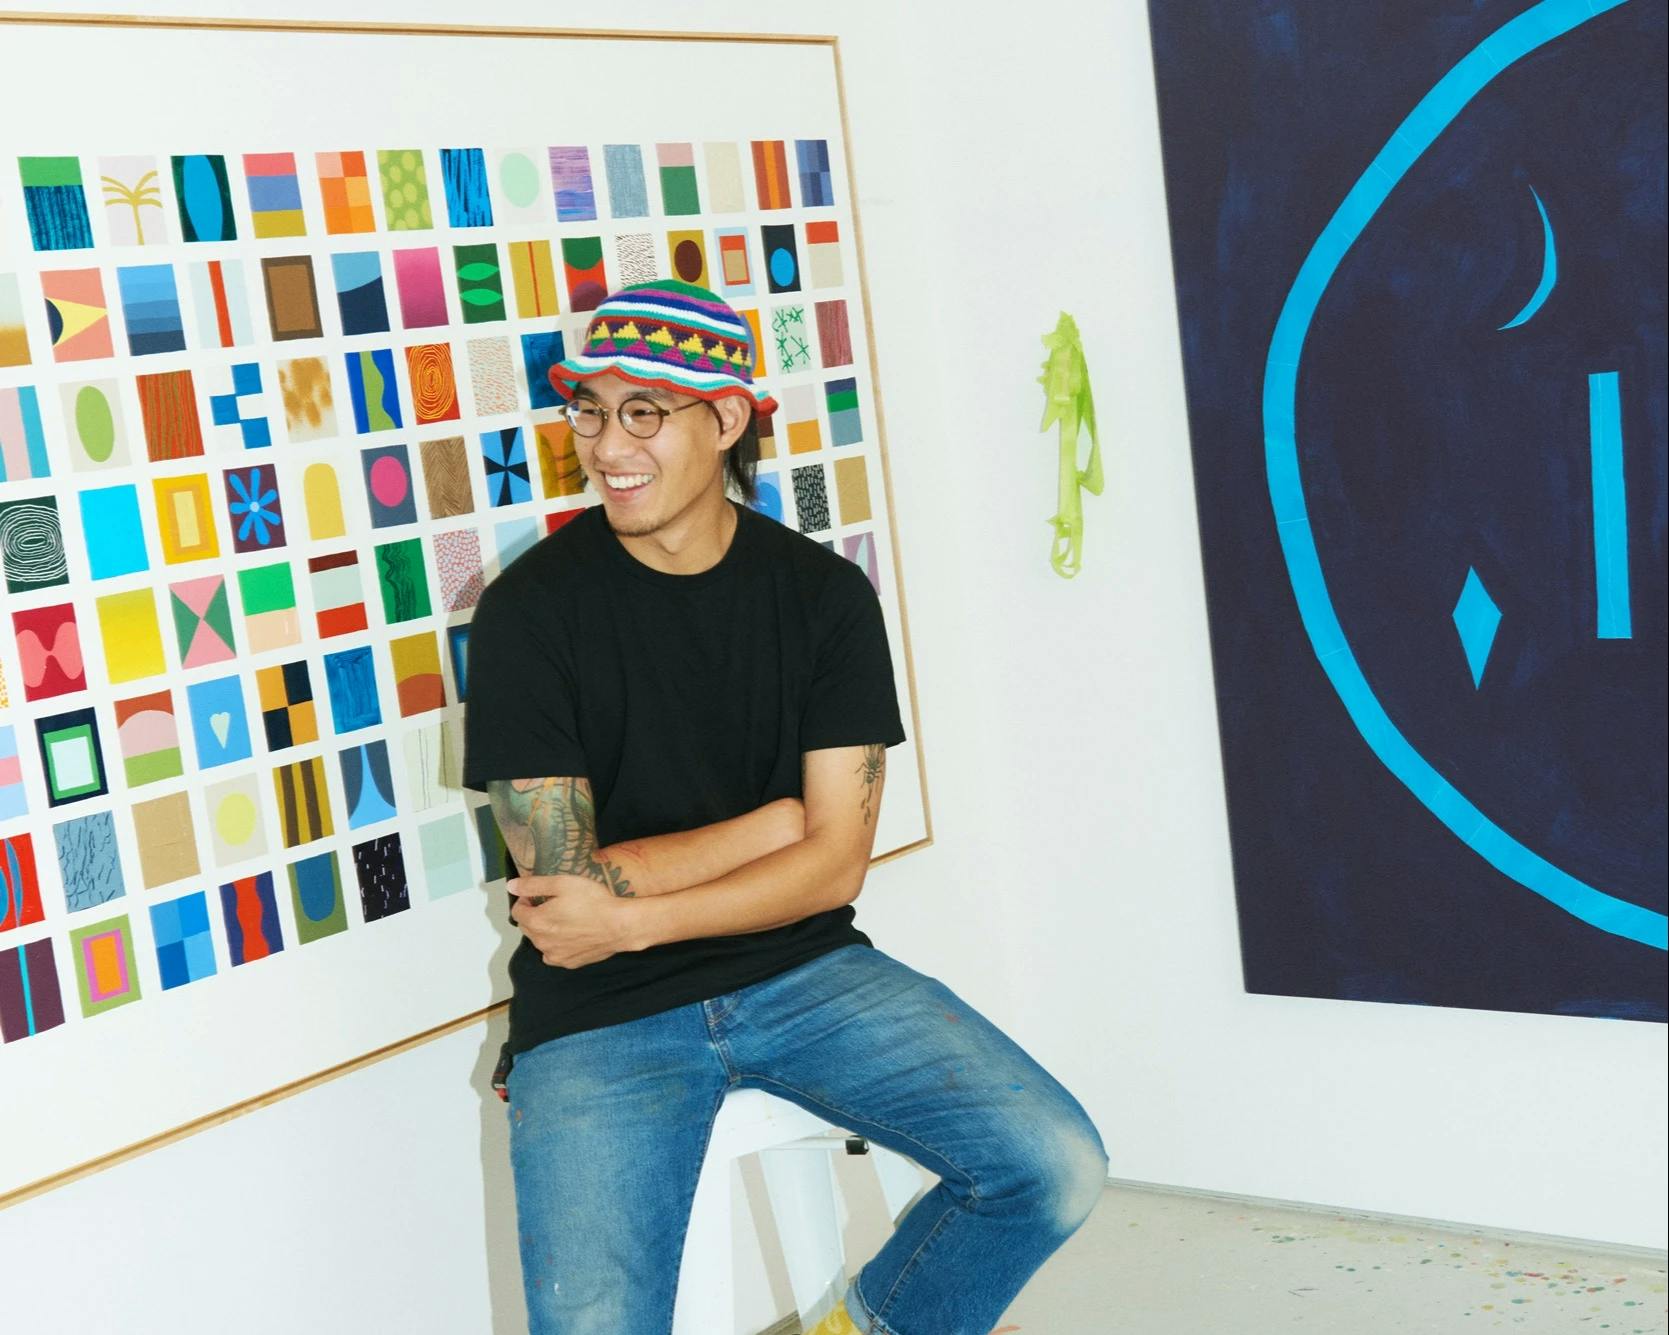 Artist Scott Sueme sitting on a stool in his studio surrounded by large, abstract paintings.